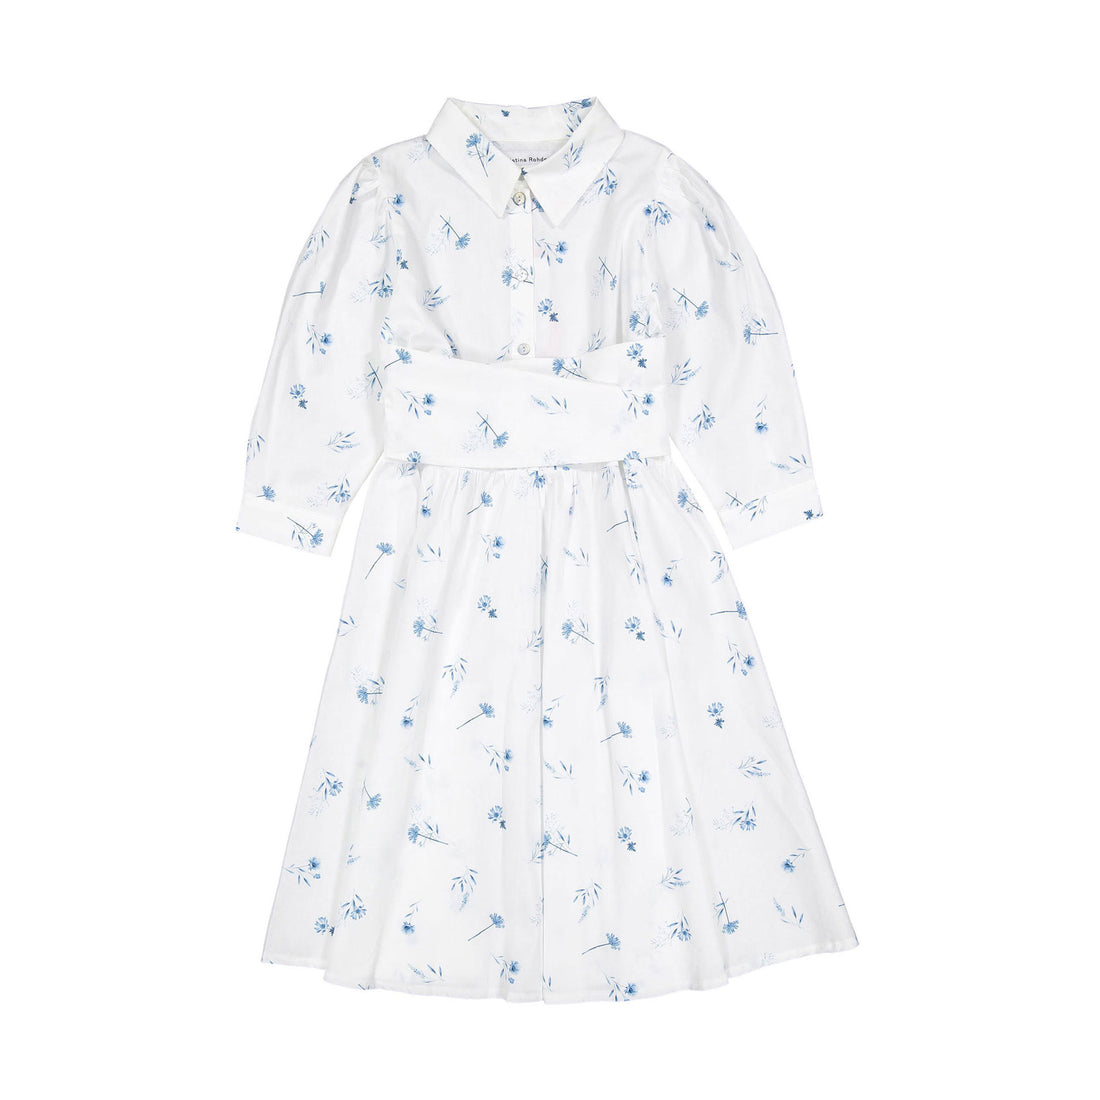 Christina Rohde White/Blue Floral Belted Dress